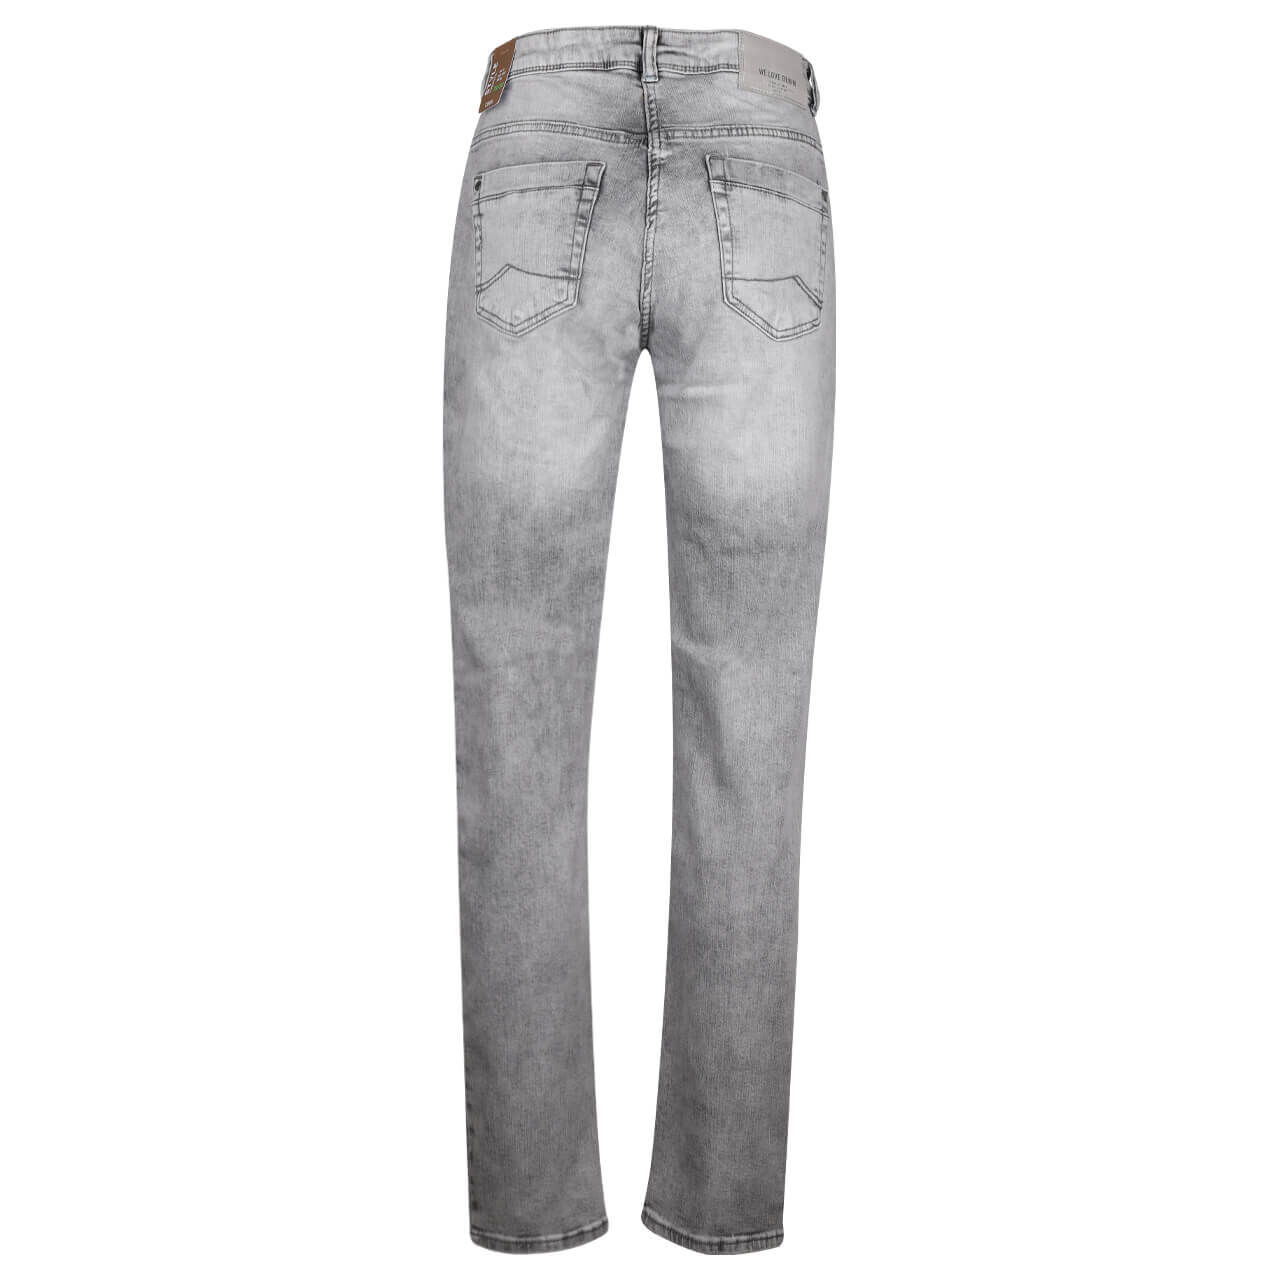 Cecil Toronto Jeans mid grey washed